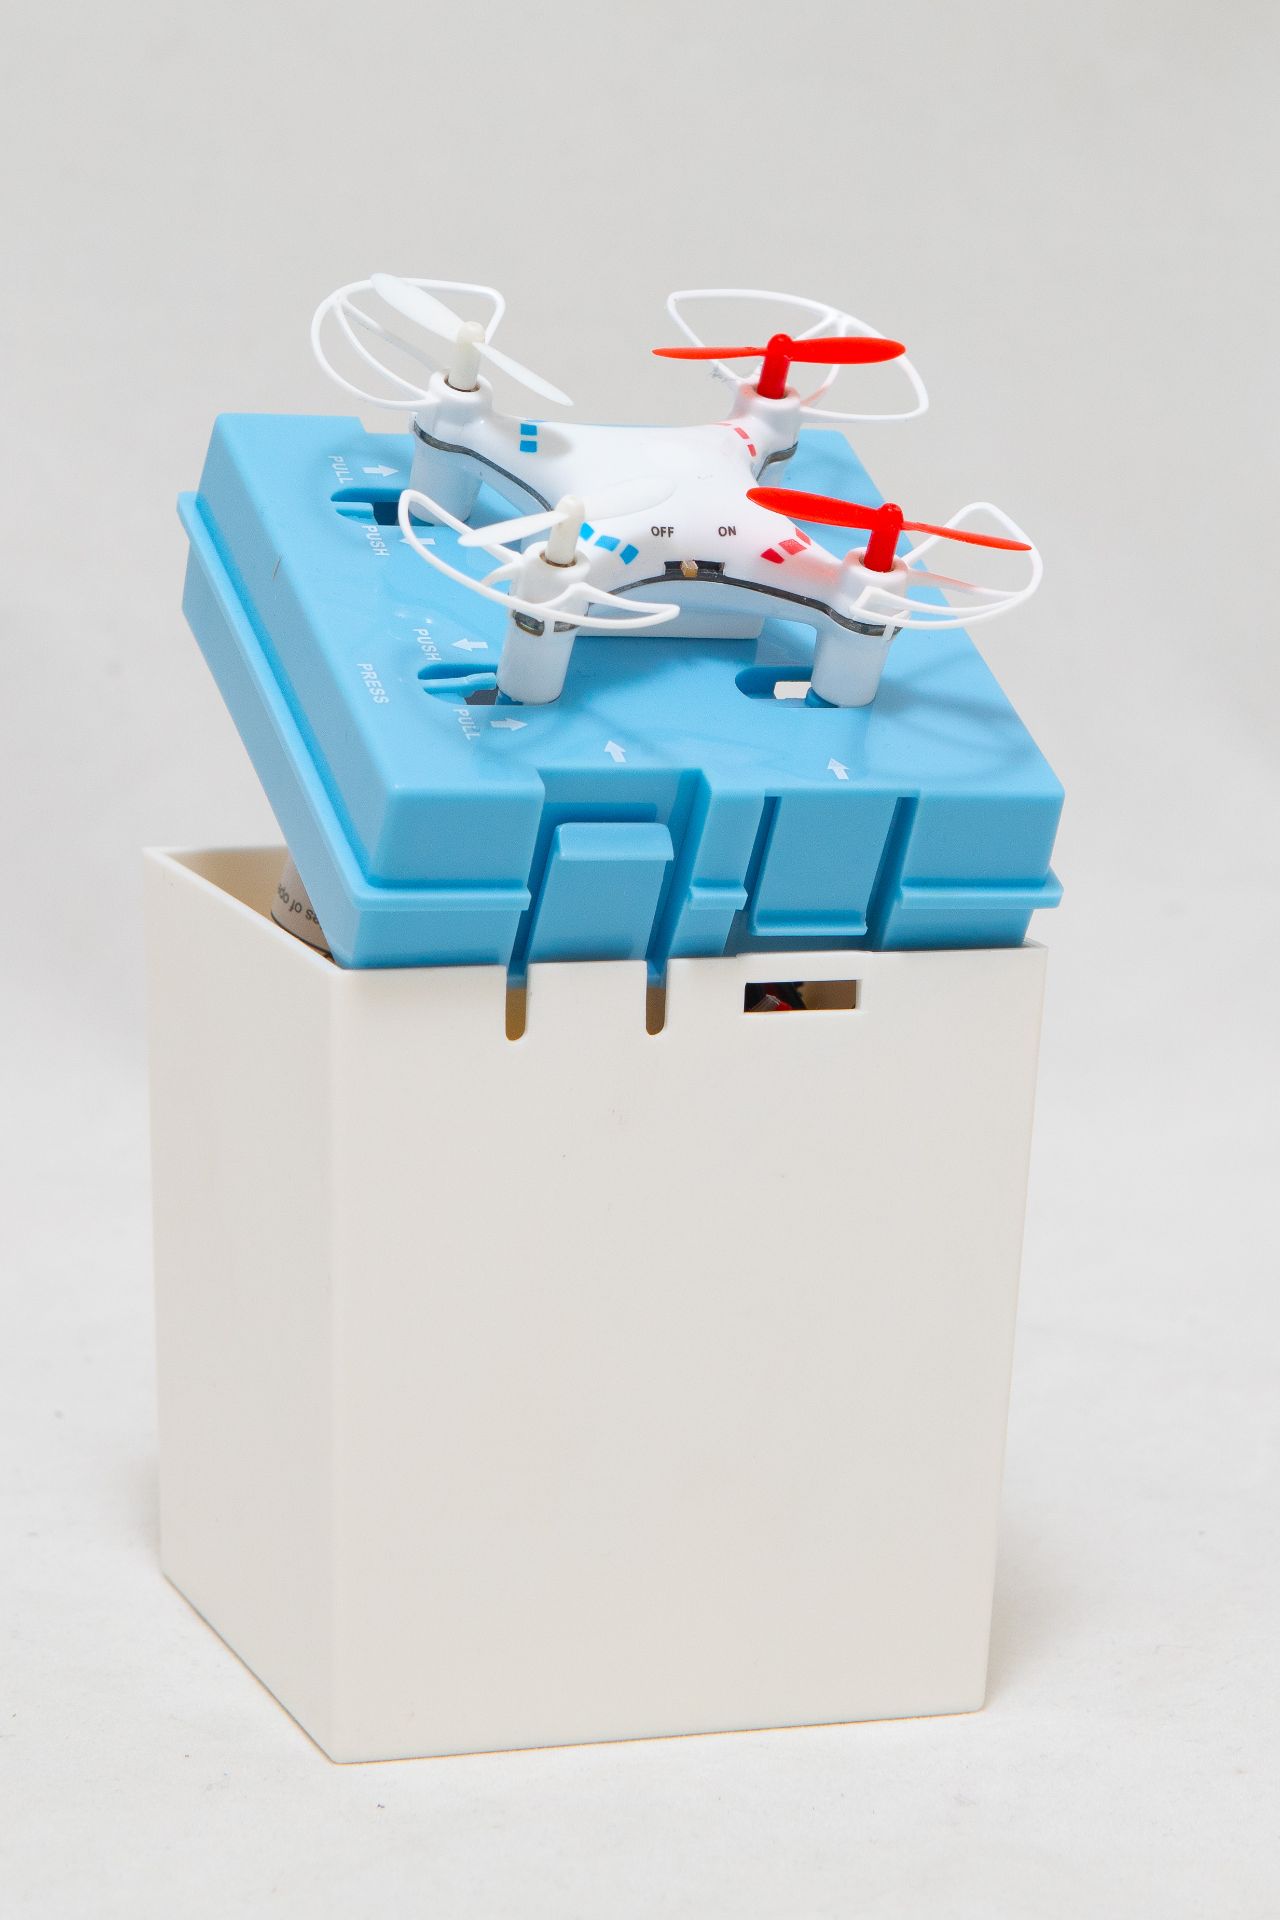 24 X BRAND NEW MINI QUADCOPTERS WITH GYROSCOPE - RRP APPROX £350 - Image 6 of 10